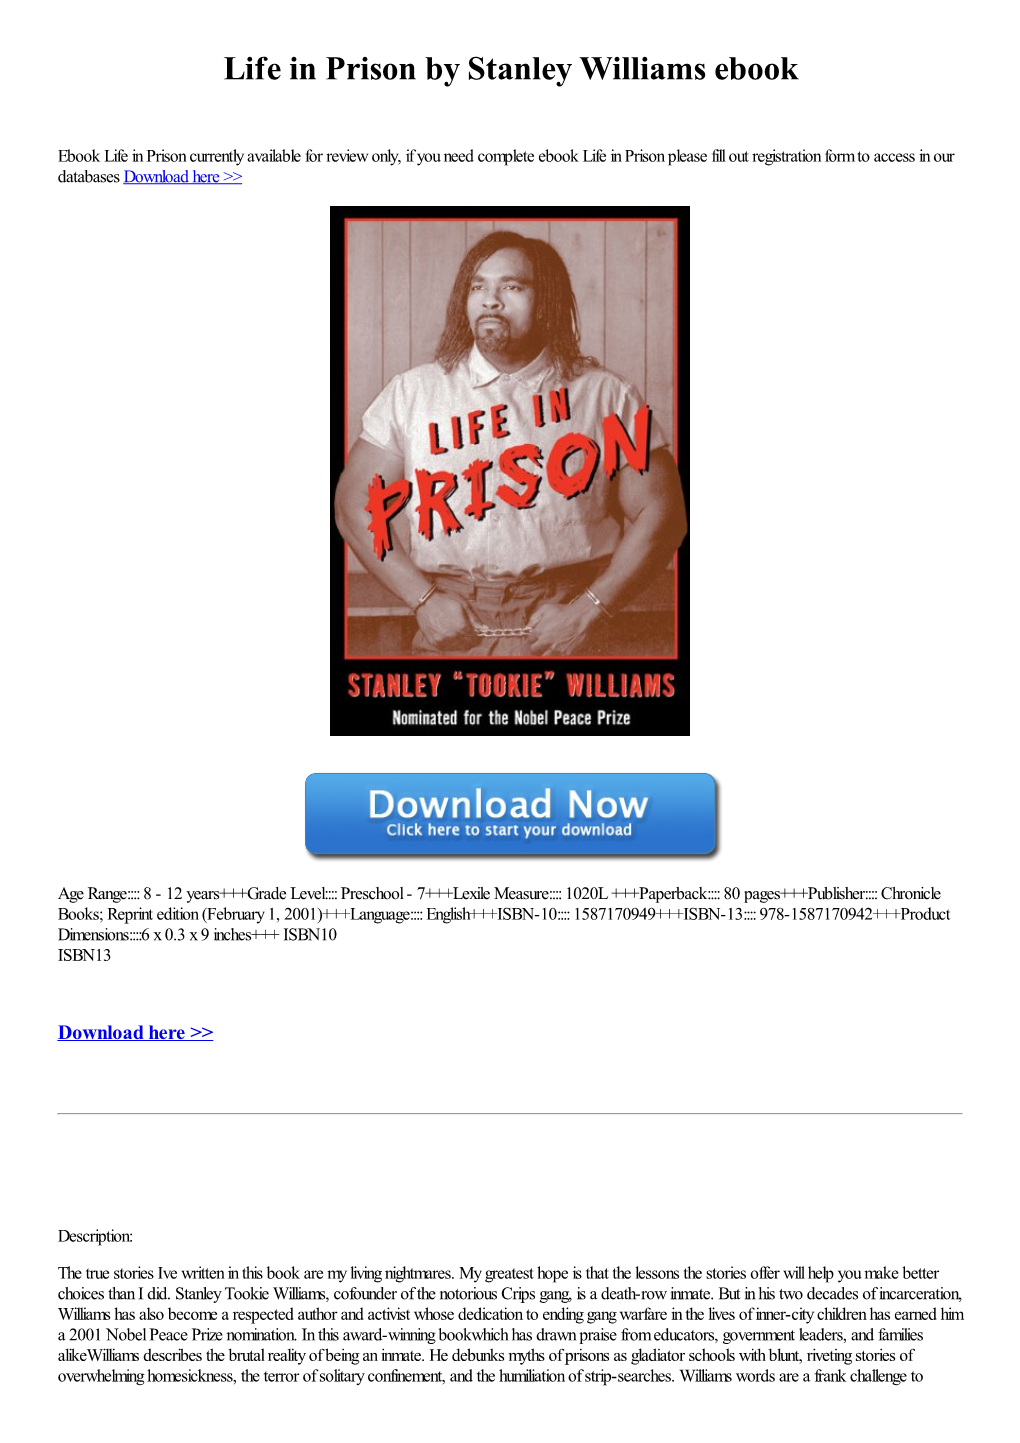 Life in Prison by Stanley Williams [Book]